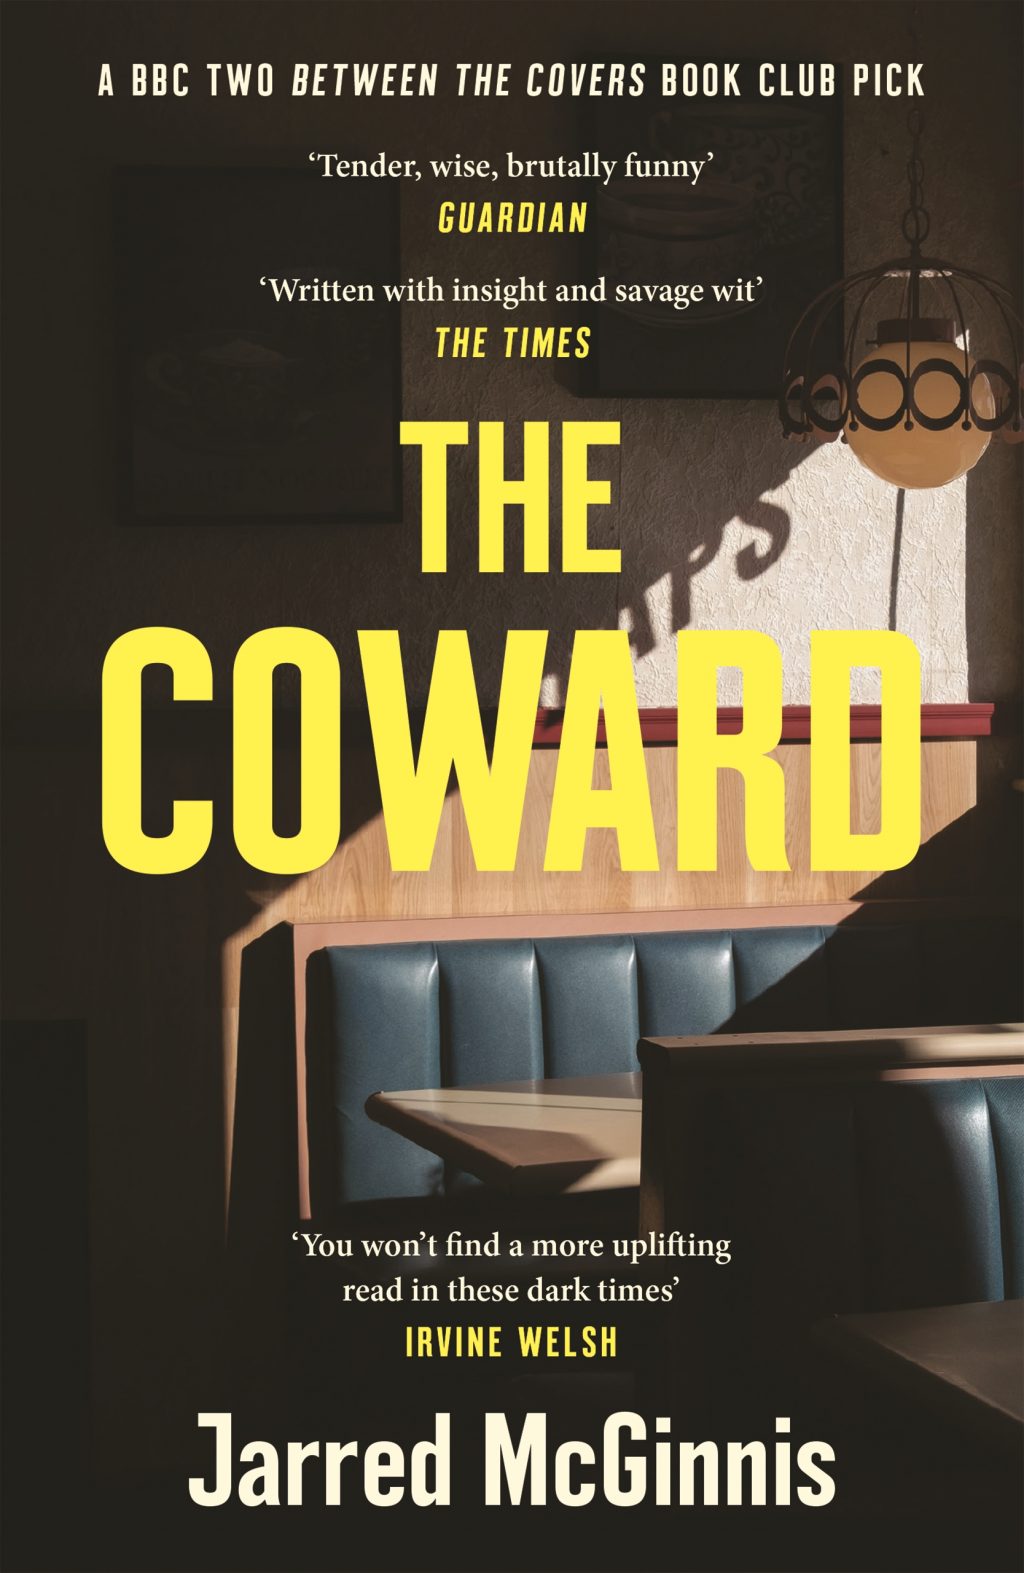 Paperback cover of the Coward by Jarred McGinnis showing a Hopper-esque diner booth